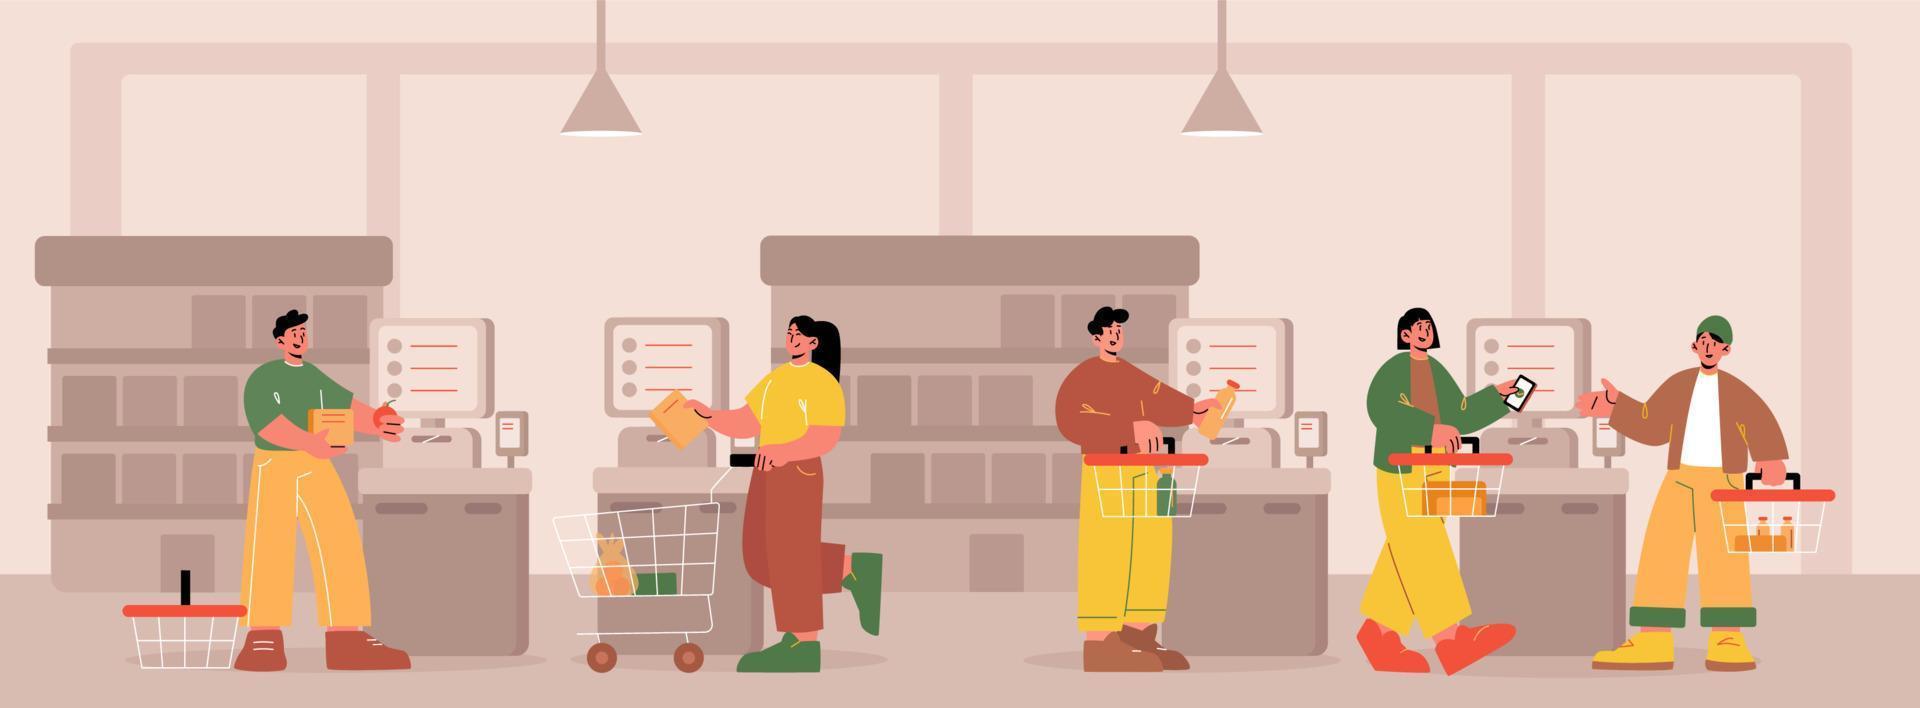 People use self service payment in supermarket vector